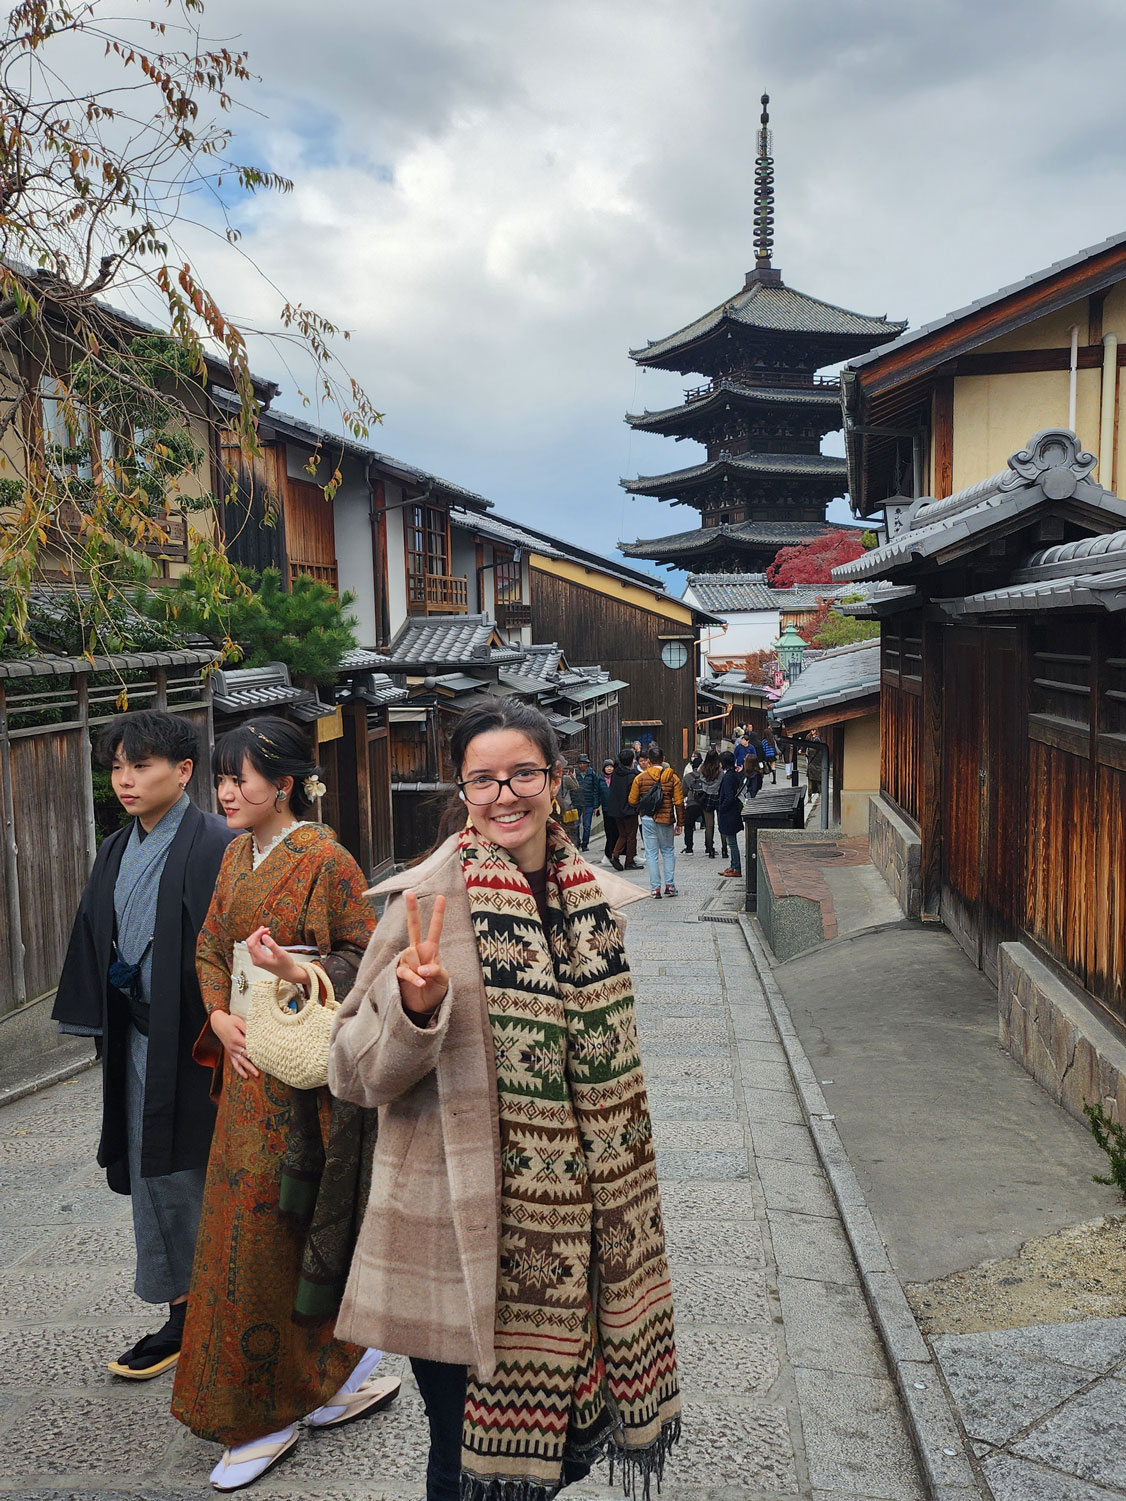 Alina walking the streets of Japan with a temple in the background